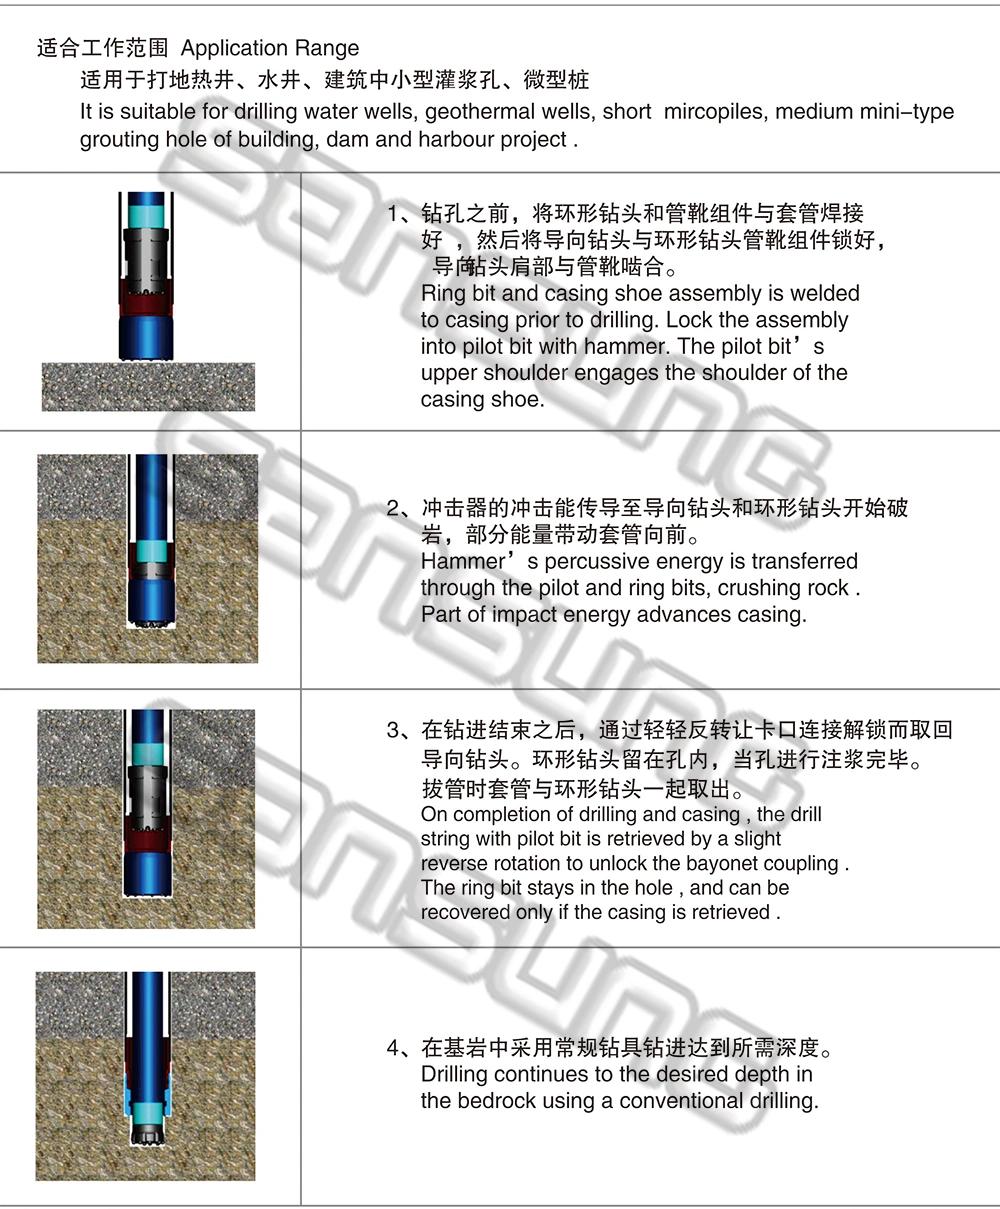 Odex Retrievable/Permanent Symmetric Casing Equipment for Drilling/Waterwells/Geothermal/Building